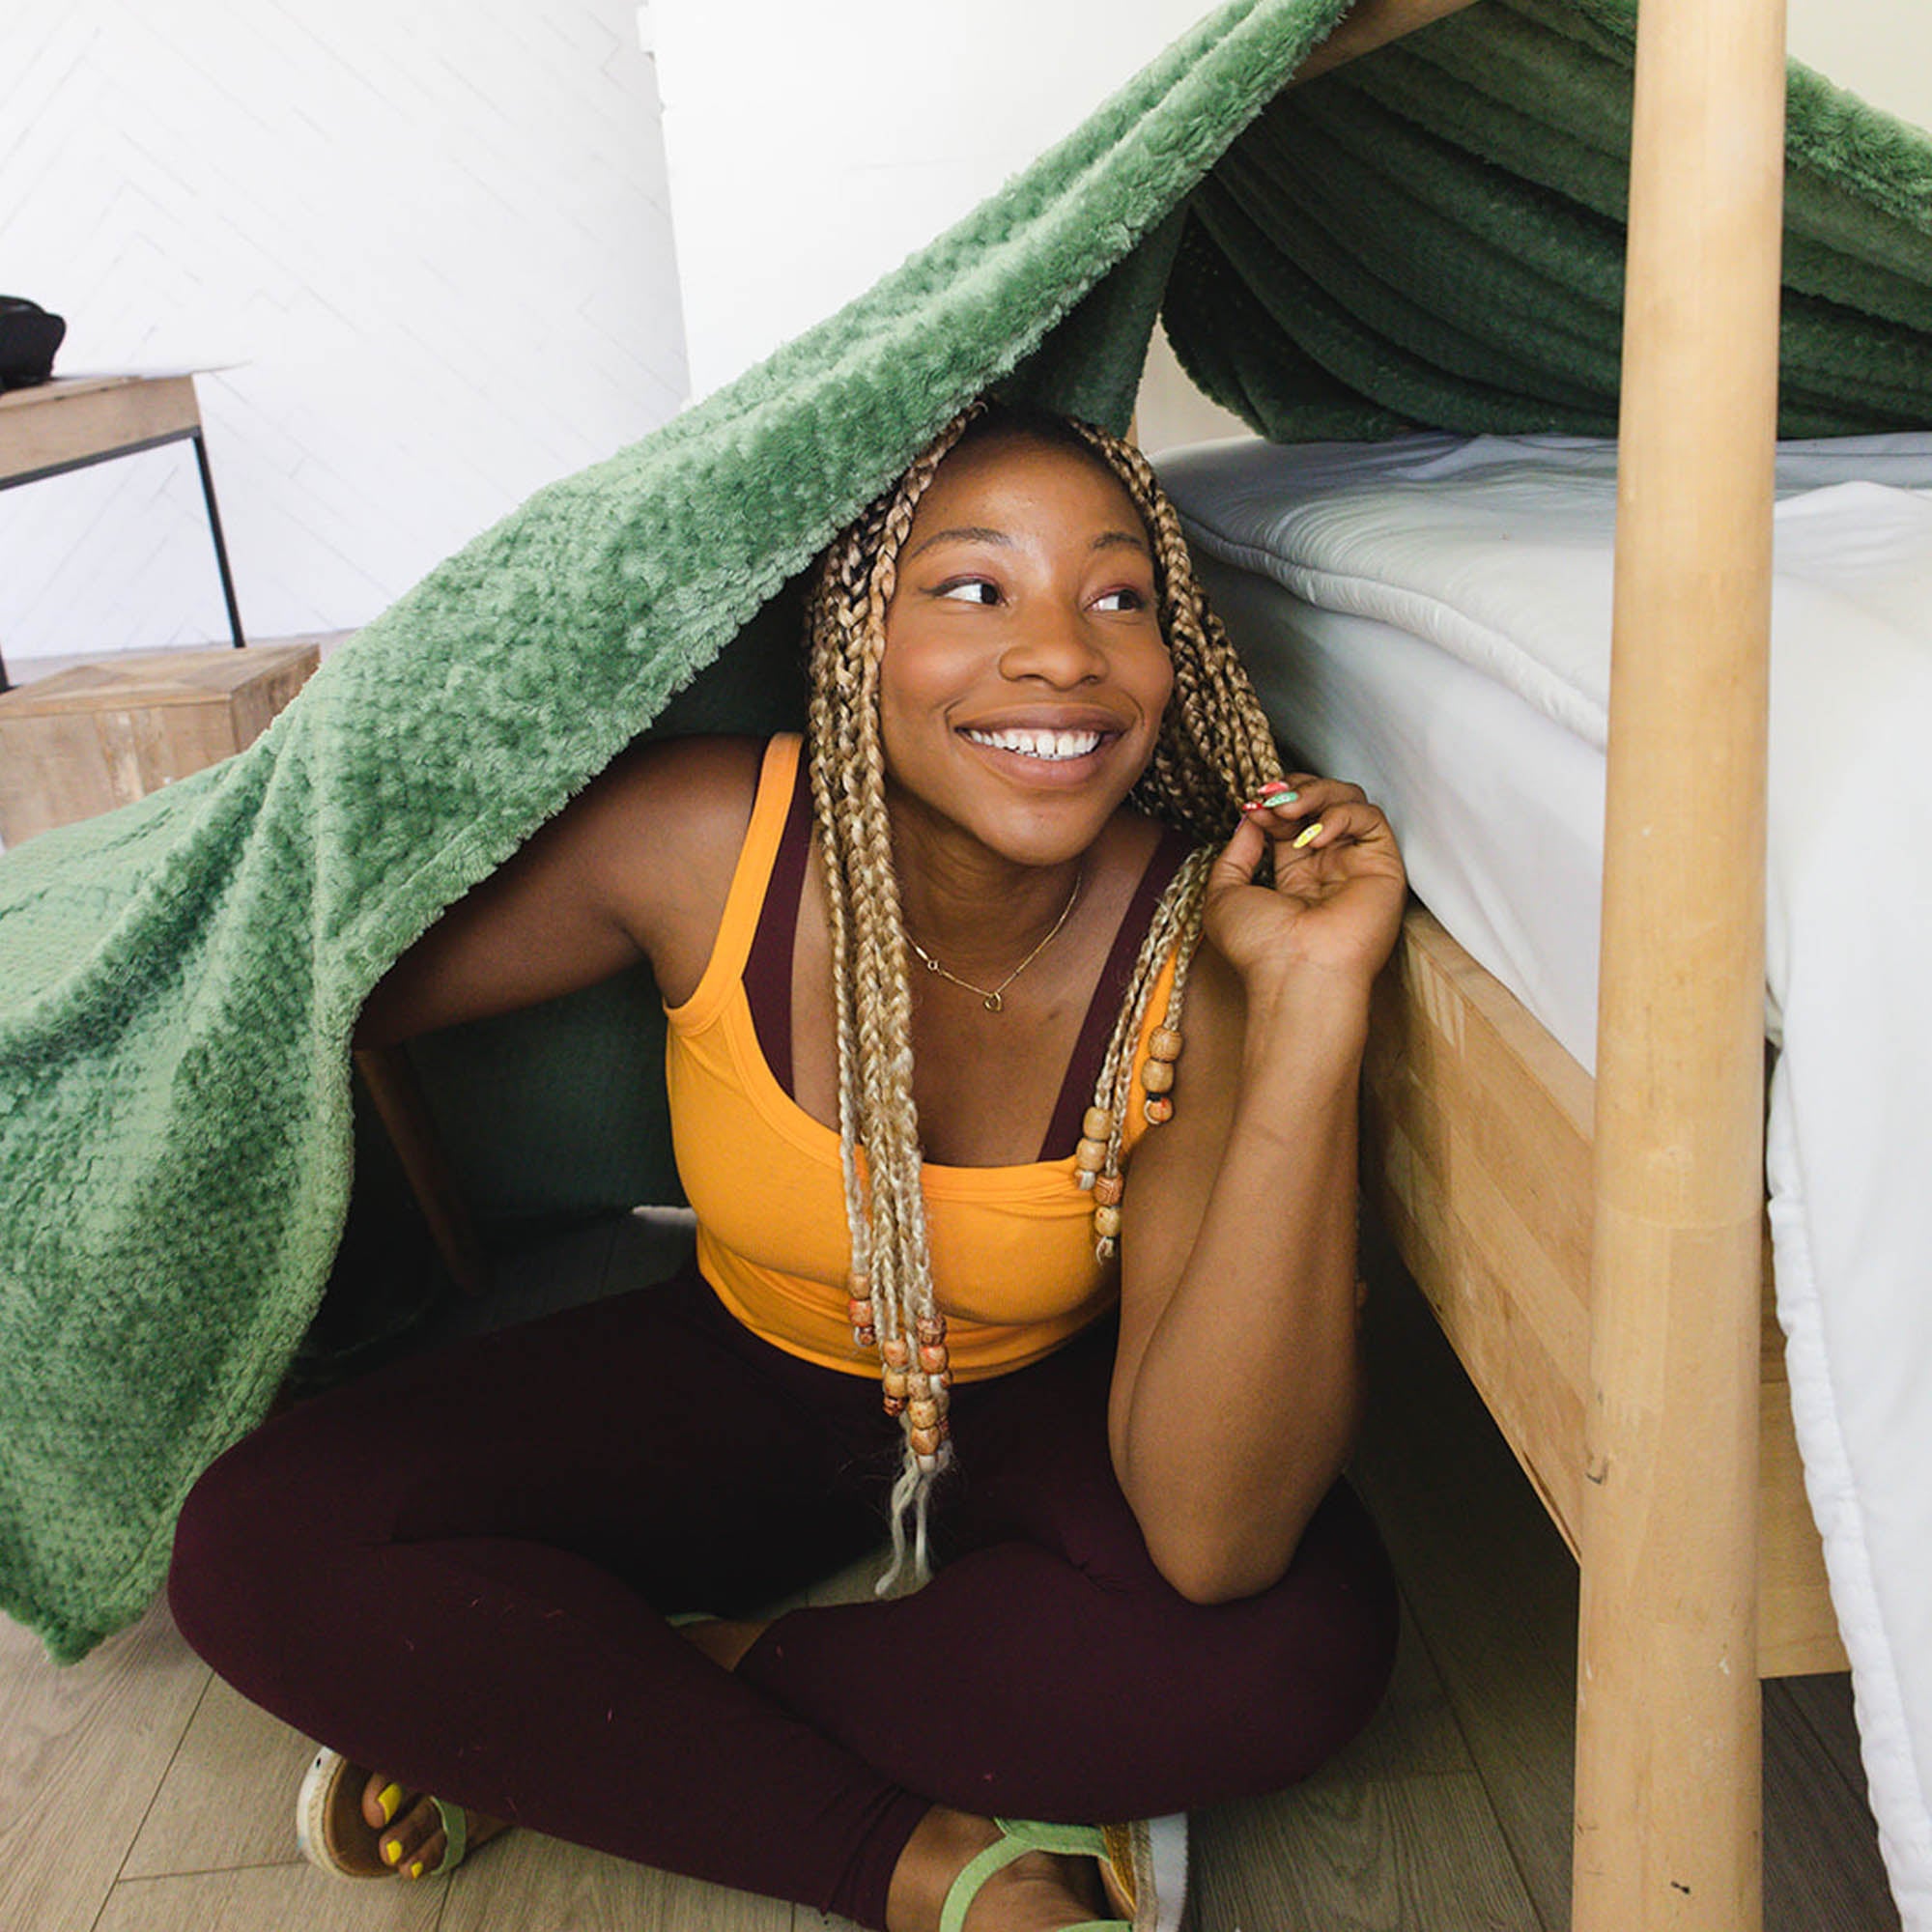 A woman sits inside a blanket fort made with a green blanket